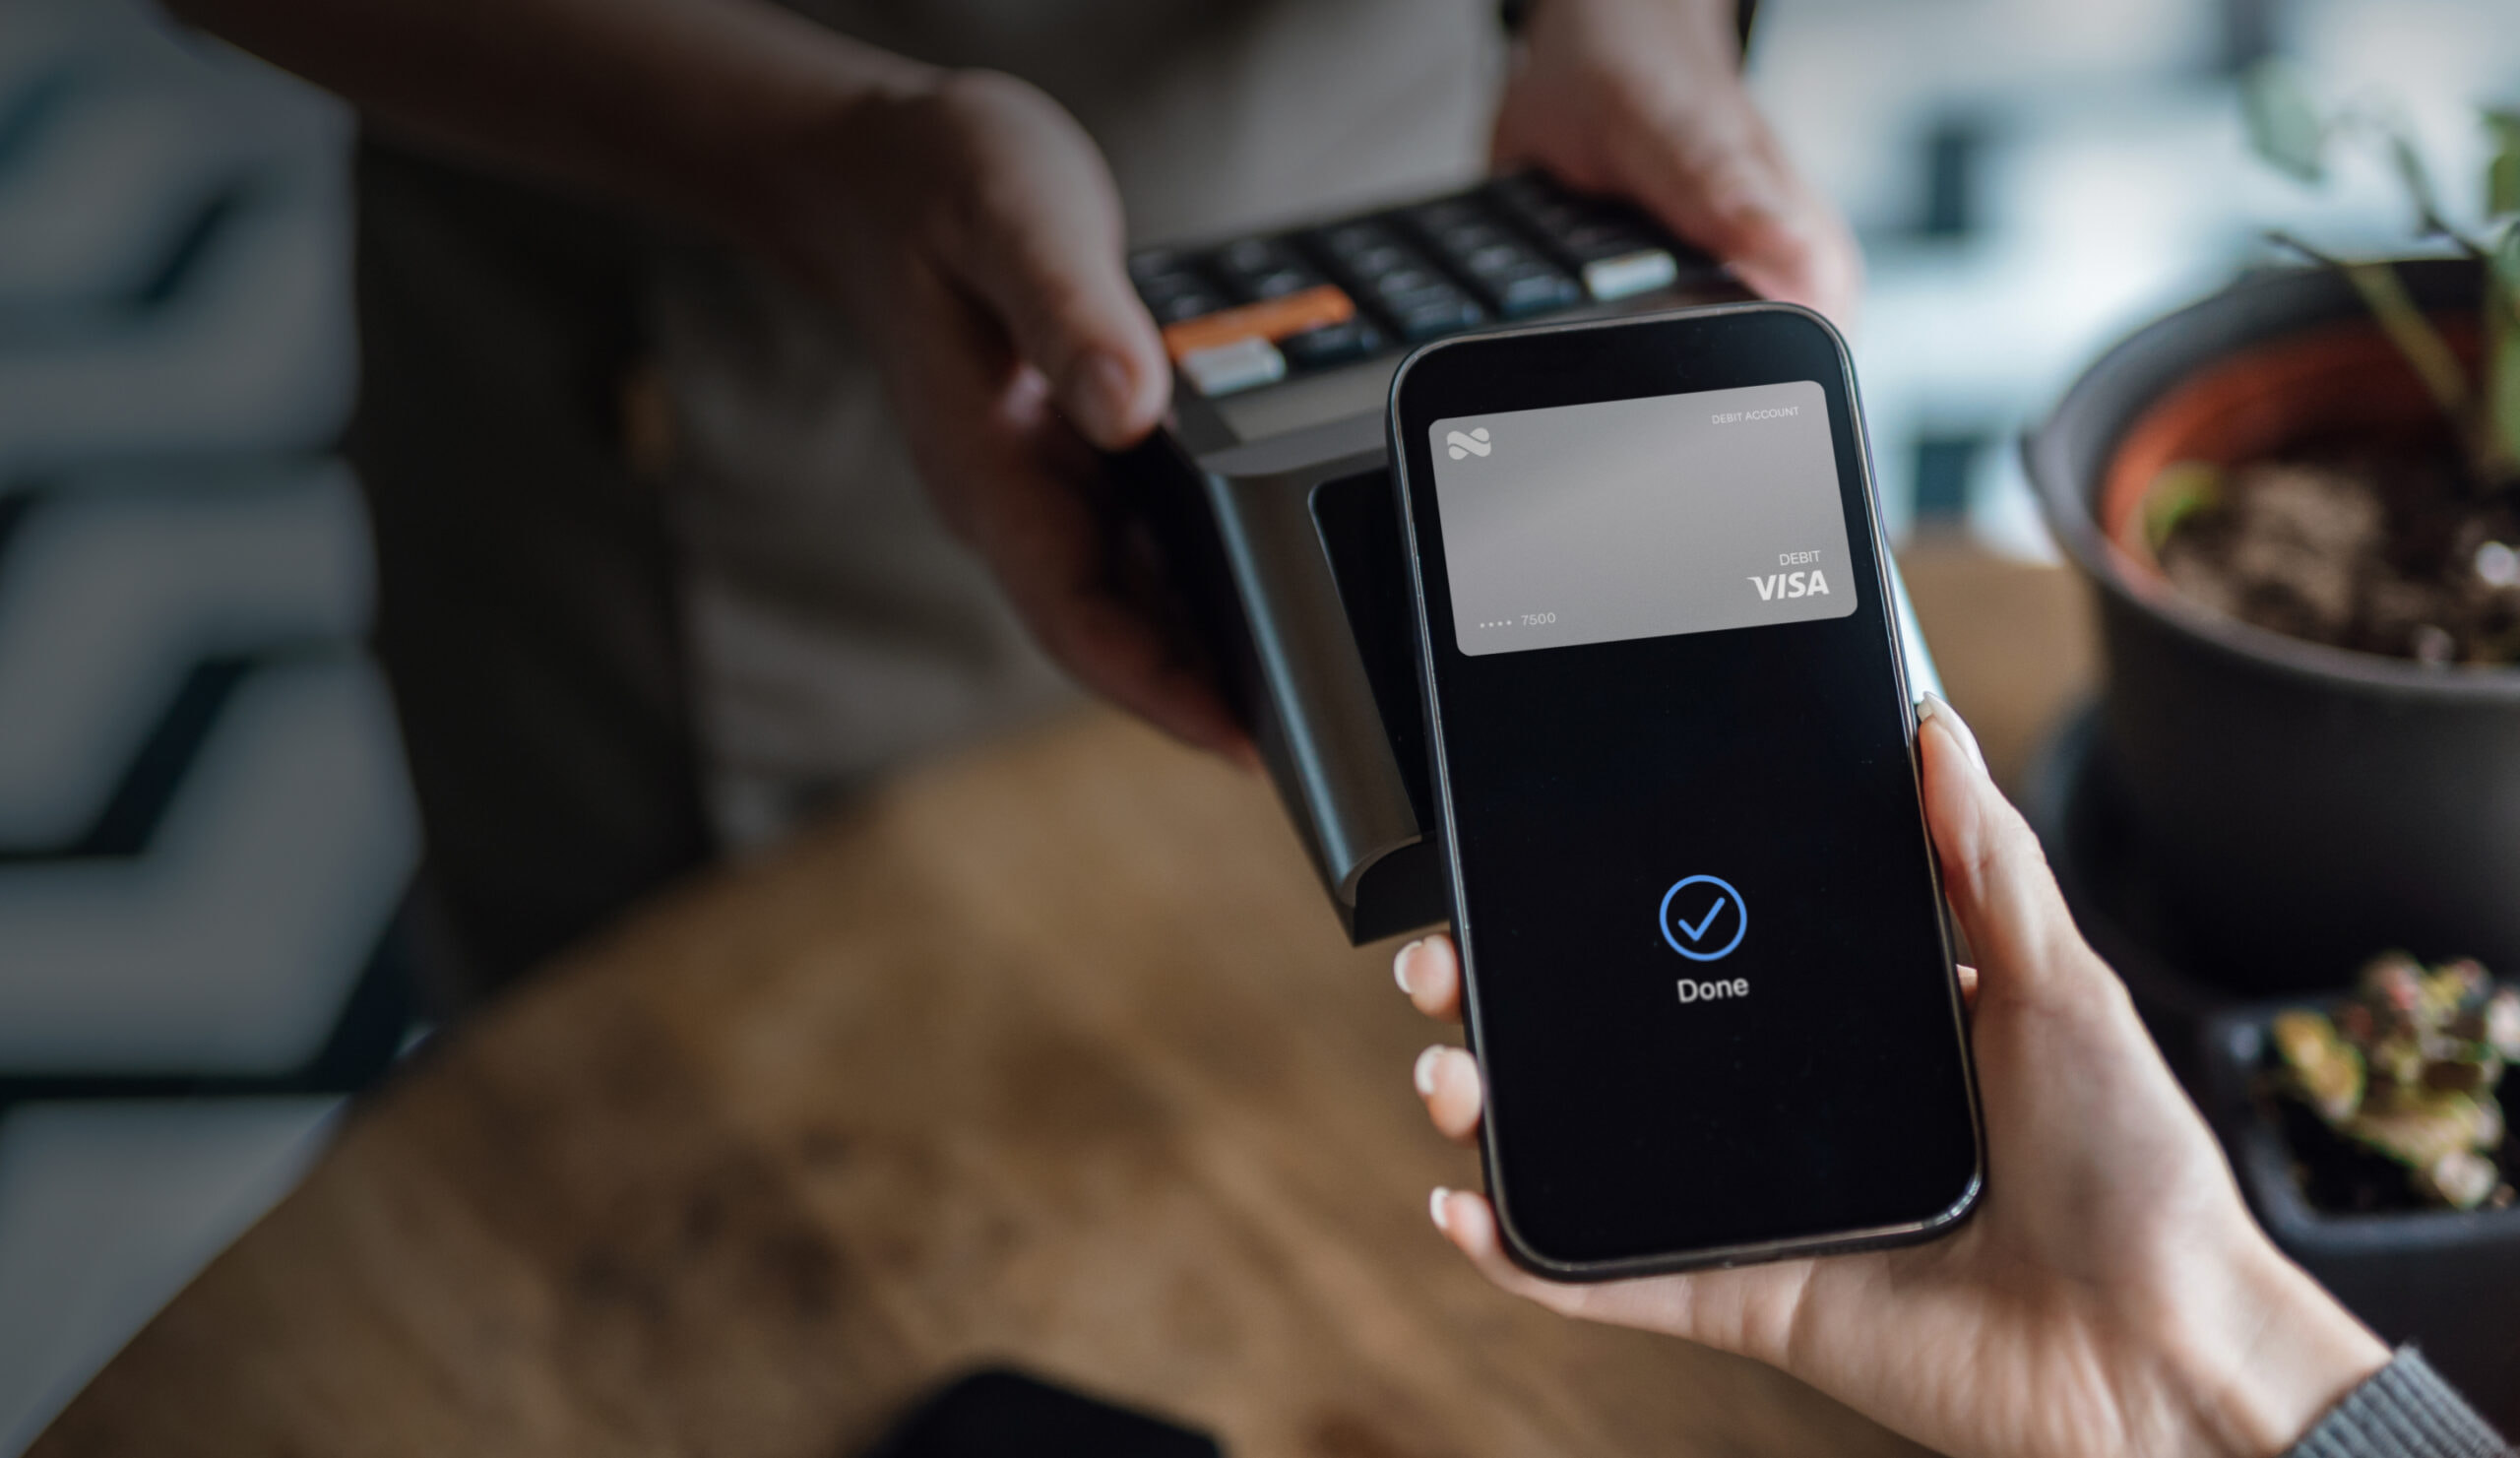 Tapping to pay with the Netspend digital wallet